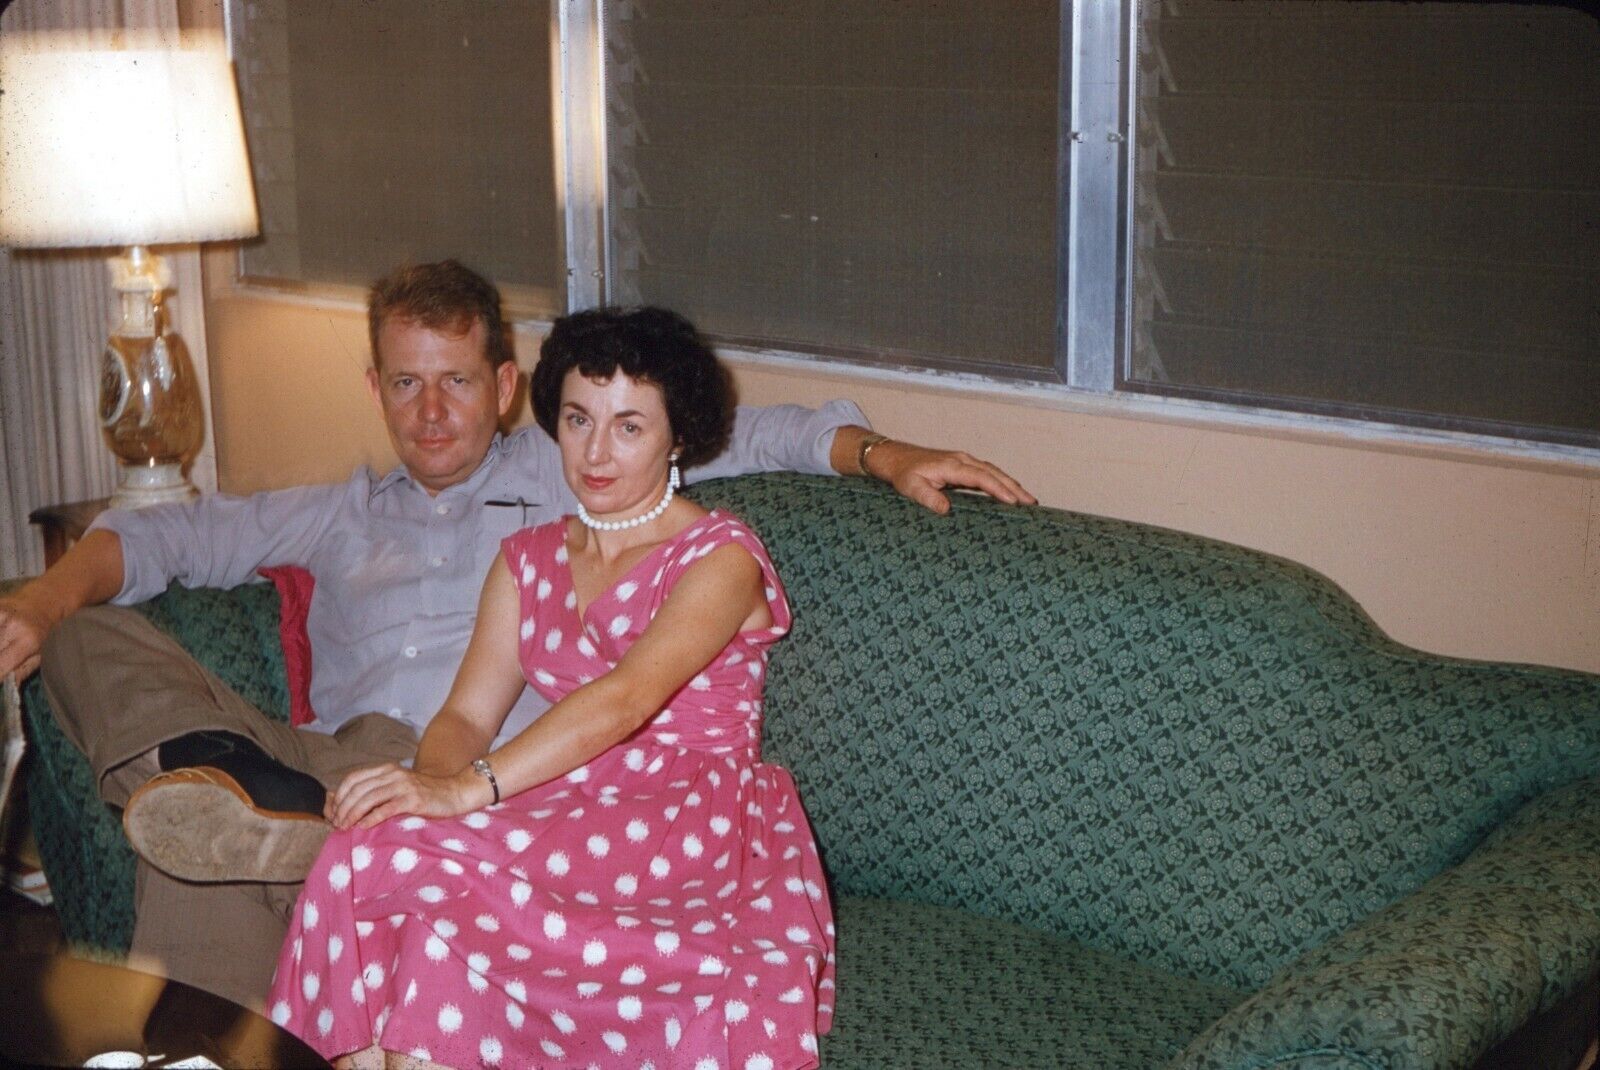 1950s Young Couple on Couch Pearls Polk Dot Dress Vintage 35mm Red Border Slide